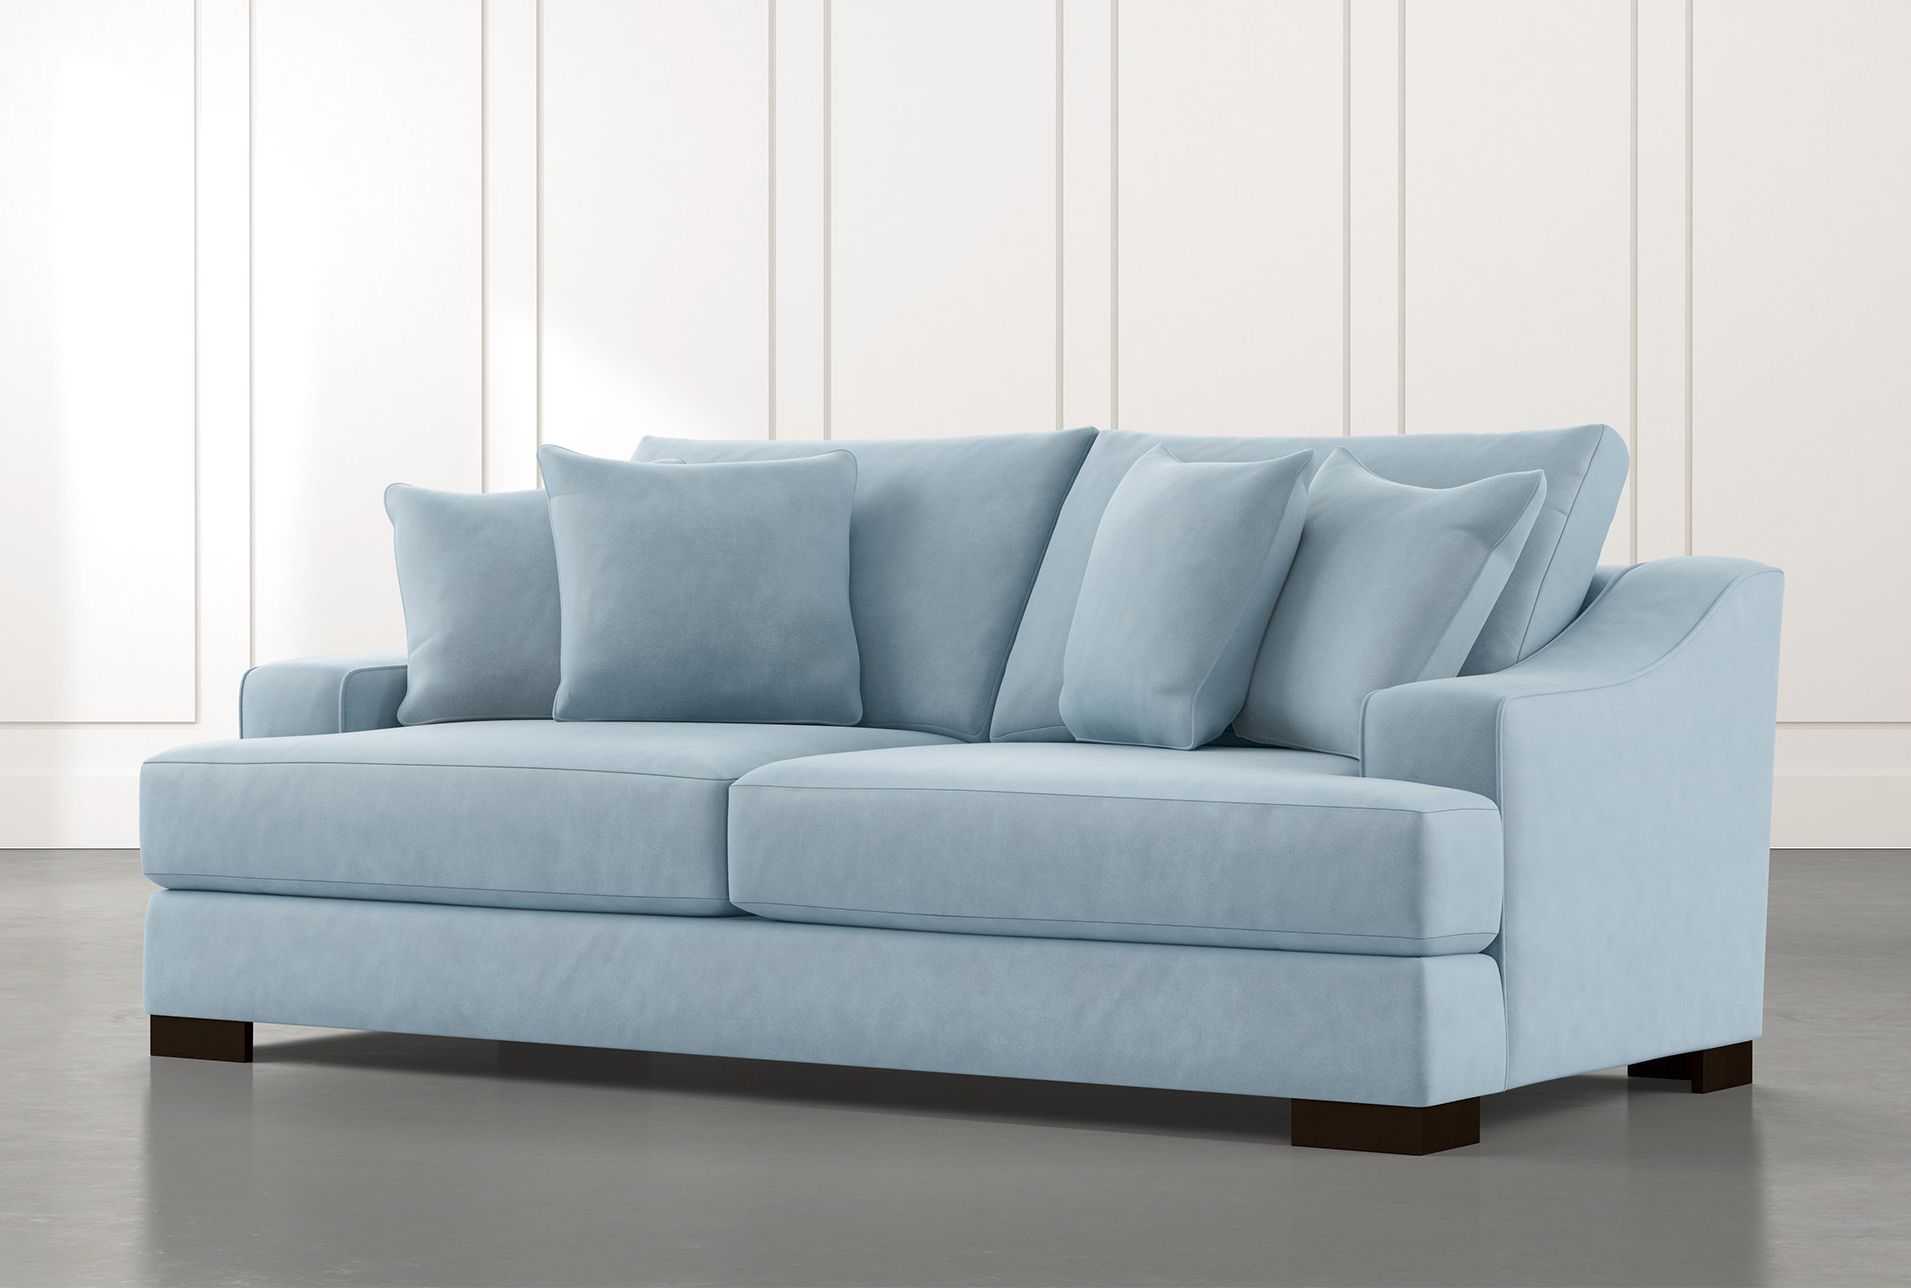 Lodge 96" Light Blue Sofa | Living Spaces With Modern Blue Linen Sofas (View 11 of 20)